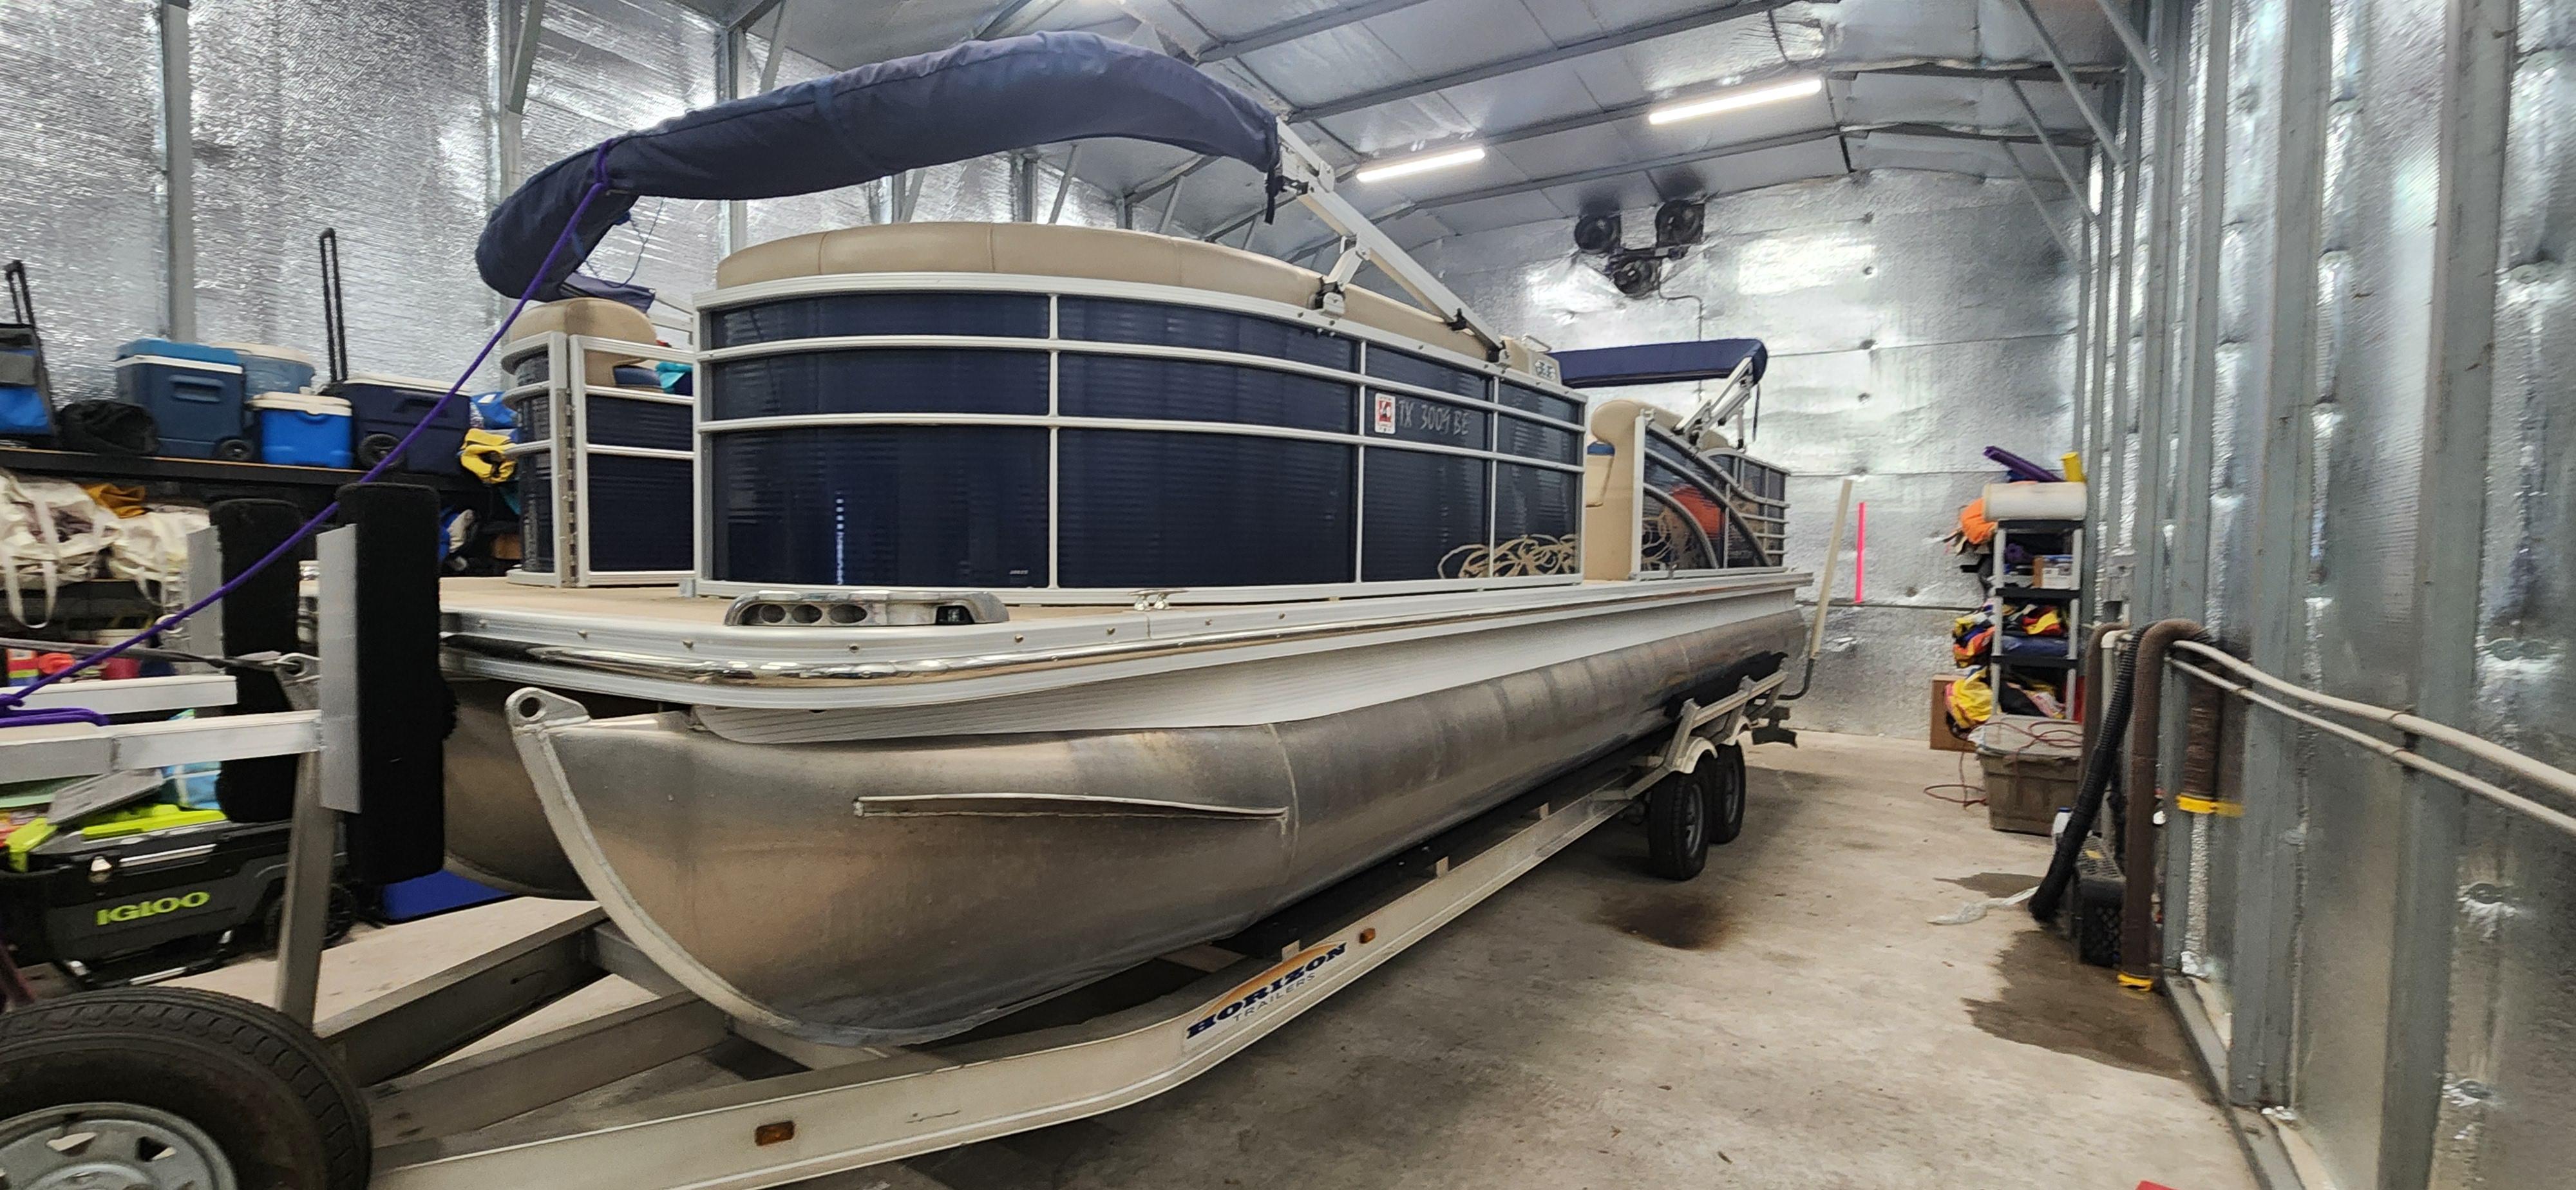 Pontoon boats for sale in Texas by owner - Boat Trader